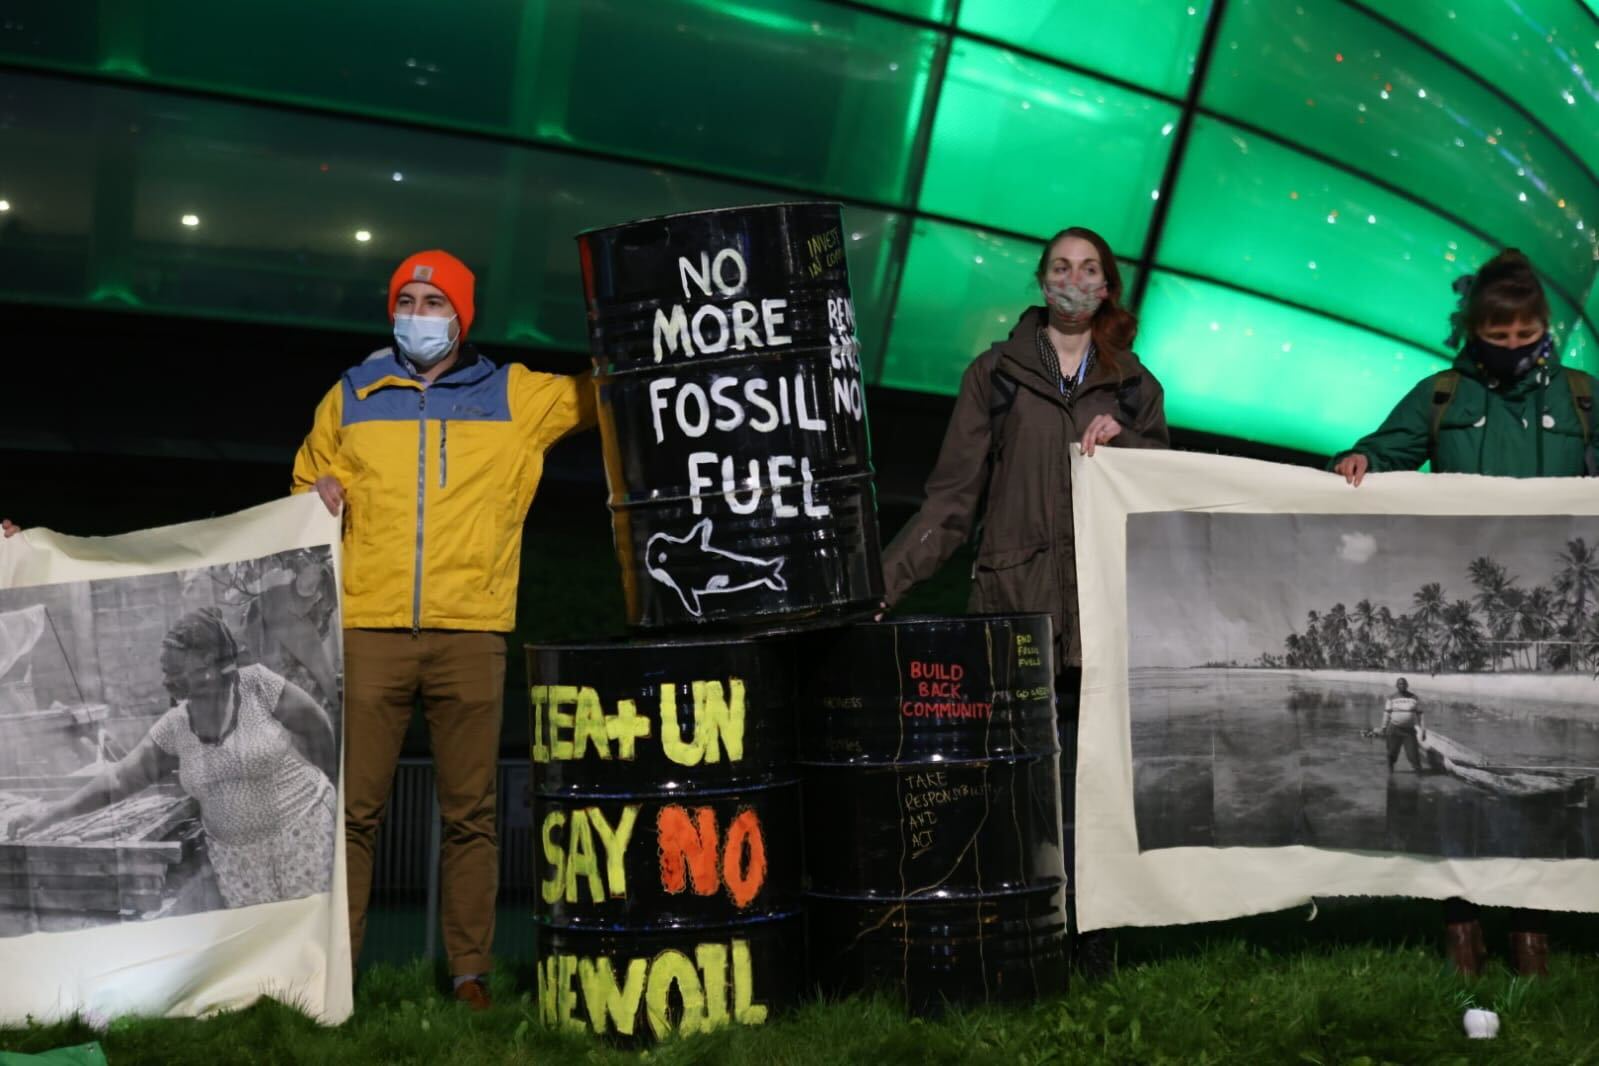 Global Gas & Oil Network: Glasgow Climate Pact Fails to Acknowledge Need to Phase Out Fossil Fuels